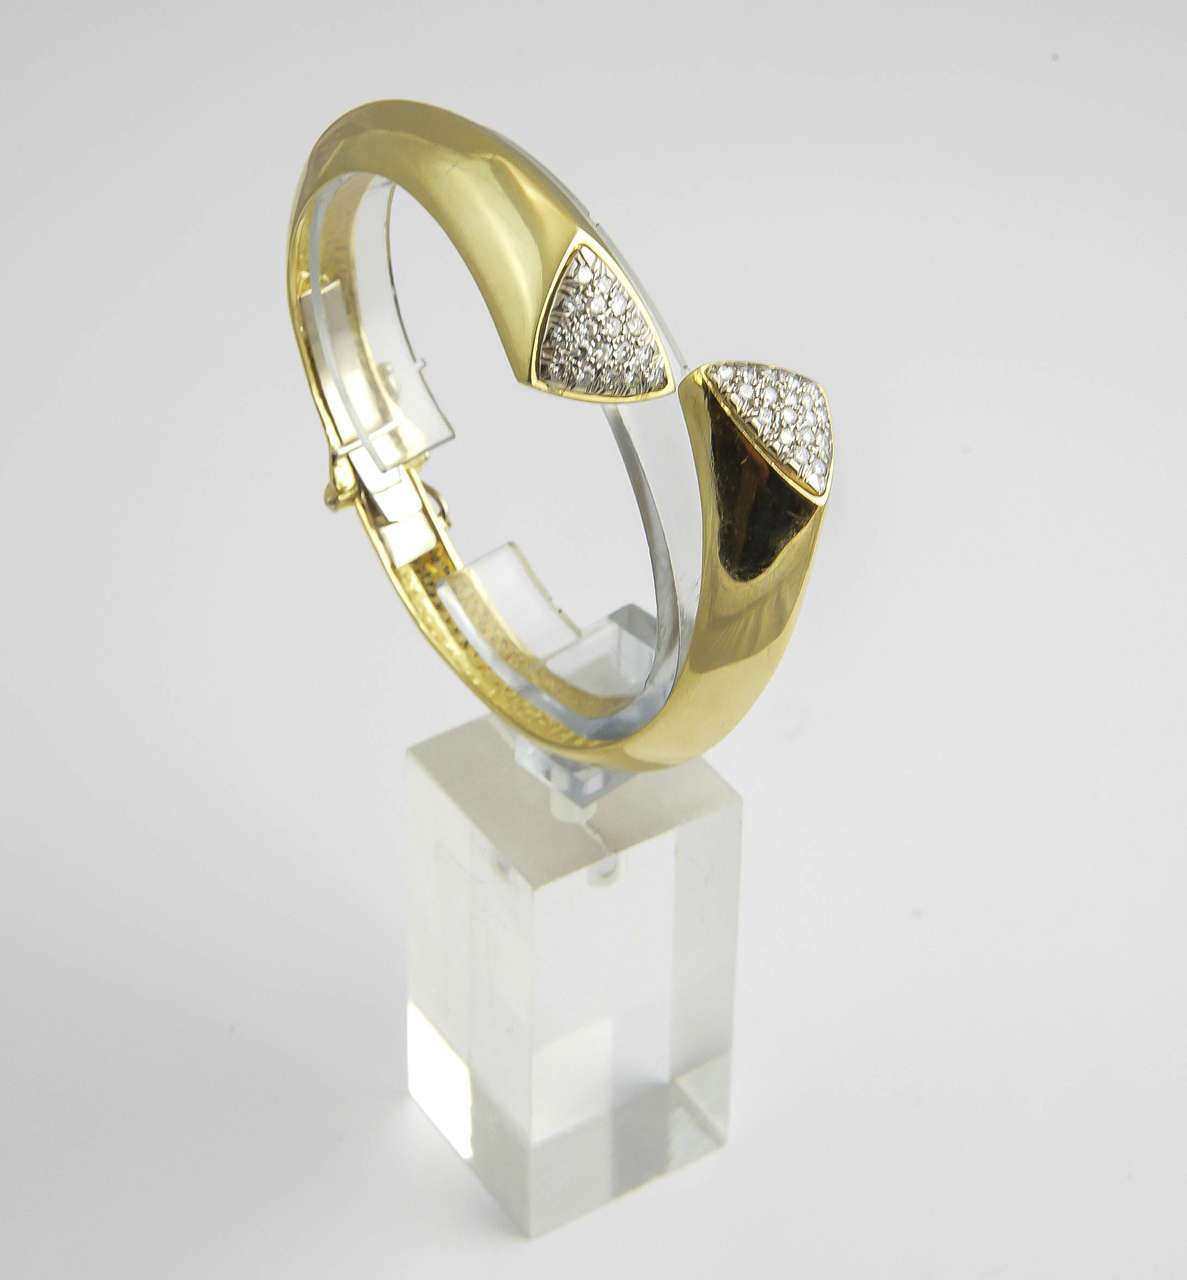 Geometric 18k gold hinged bangle bracelet with pave diamond triangles.
Interior dimension is 6.5".